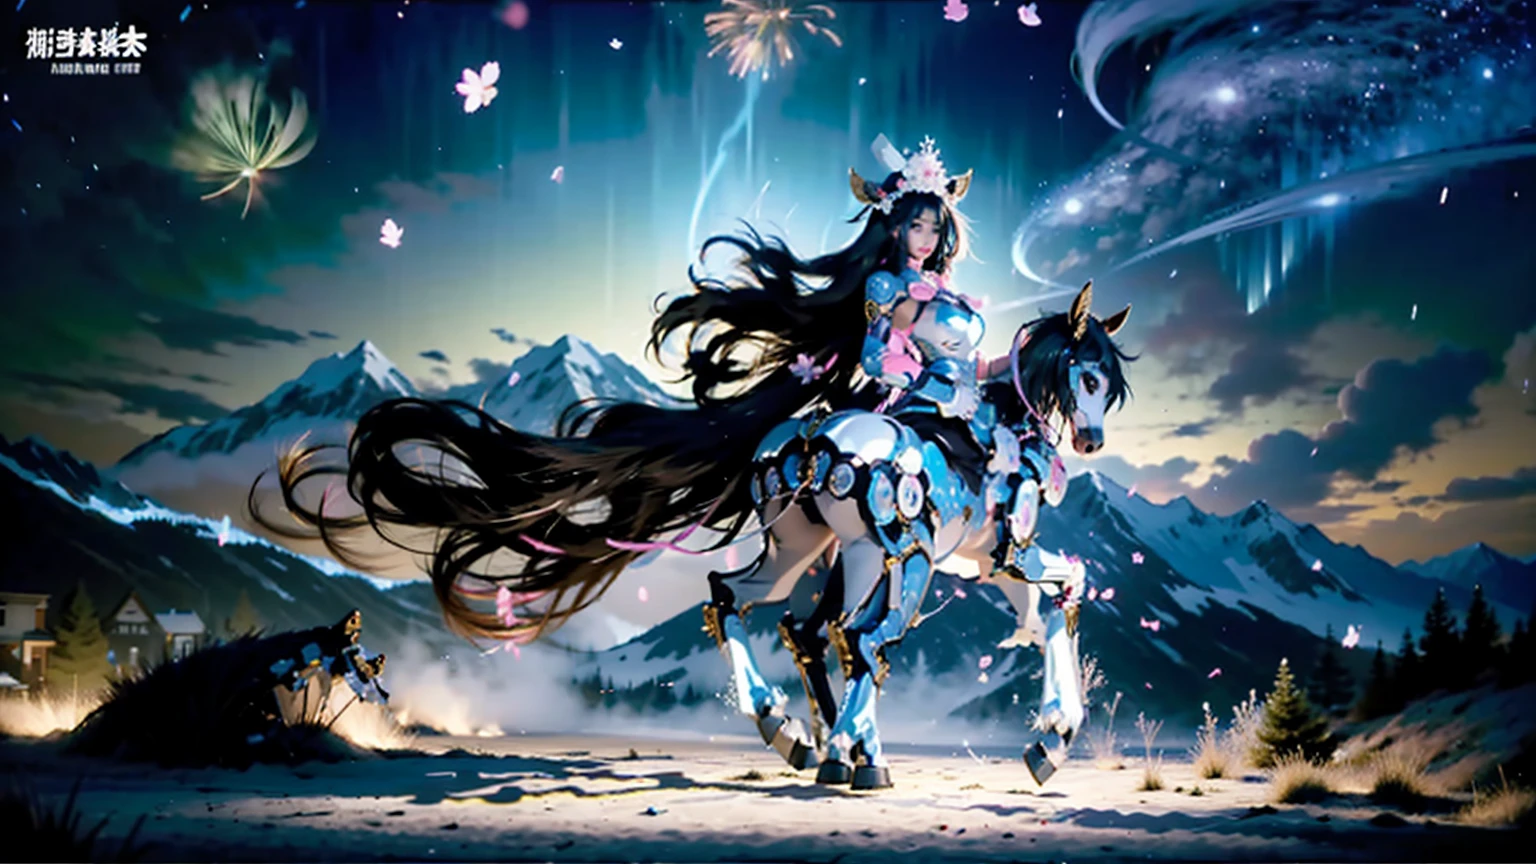 In the beautiful illustration of this super-grand scene，The ultra-long-distance lens shows us（More than eight distinctive and beautiful female centaurs，Half Man, half horse，Half Man, half horse，PRİNCESS：2.7），Their Personality、Distinctive and vivid features。from（shining, Angelic, snow-white centaur from heaven：1.1），arrive（Nightmarish fiery red Half Man horse surrounded by flames：1.1）、Arrive again（Green Half Man Horse, The wind spirit flying in the sky：1.1）、Arrive again有（One-horned blue Half Man horse surrounded by lightning：1.1），arrive（A mechanical mecha with shining metallic light：1.1）、Arrive again（A powerful dragon-shaped Half Man horse with colorful dragon scale leather：1.1）、Arrive again（A slender elven centaur that is graceful and agile：1.1）Elegantly put on a flower crown、arrive（Enchanting and charming Tiflin centaurs：1.1）、Arrive again（The succubus Half Man has an indescribable sexy feeling：1.1）。Each Half Man character fully demonstrates his unique style。The illustration uses advanced artistic techniques and tools，Use nesting、Weaving、Editing、view、interlude、Montage and other artistic techniques，Divide the scene into parts according to geometric arrangement，Each part corresponds to a role，from and more efficiently utilize space，Let eight Half Man horses exist in one picture at the same time，（The style tends to be weird、Hayao Miyazaki、Aesthetic、Unspeakable：3.3）。Advanced brush tools via Midjourney、Color Palette、Material packs and model packs、Texture tools，For each Half Man horse, Exquisite props are designed to increase racial characteristics、Clothing and physical features，Enhances the character's personality and visual appeal，（Stunning landscapes in illustrations，The sky is changing、rainbow、Aurora、Stars and Moon，Incorporating iconic landmarks such as Mount Everest，and fireworks、tranquil lake、Natural and urban elements of waves and neon lights，Create a magical atmosphere：1.5），Centaurs demonstrate their unique abilities and equipment in a variety of environments，This is true even in extreme alien landscapes。Using Midjourney&#39;s Toolaterial packs、Texture tools、The color palette makes depicting details vivid and Practical，from complex hairstyles and different ethnic characteristics、Body、Appearance characteristics、Clothing arrives with realistic textures，Greatly improved the realism of the Centaurs and their surroundings，The fusion of multiple art styles adds vitality to the characters&#39;Movement at all angles，The overall visual experience is further enriched。The final illustration is described as "masterpiece"，It has the following characteristics "best quality" and "Practical"，Show details of the creative process、Level of creativity and craftsmanship。 Human Development Report，（Reality，masterpiece quality，best quality）